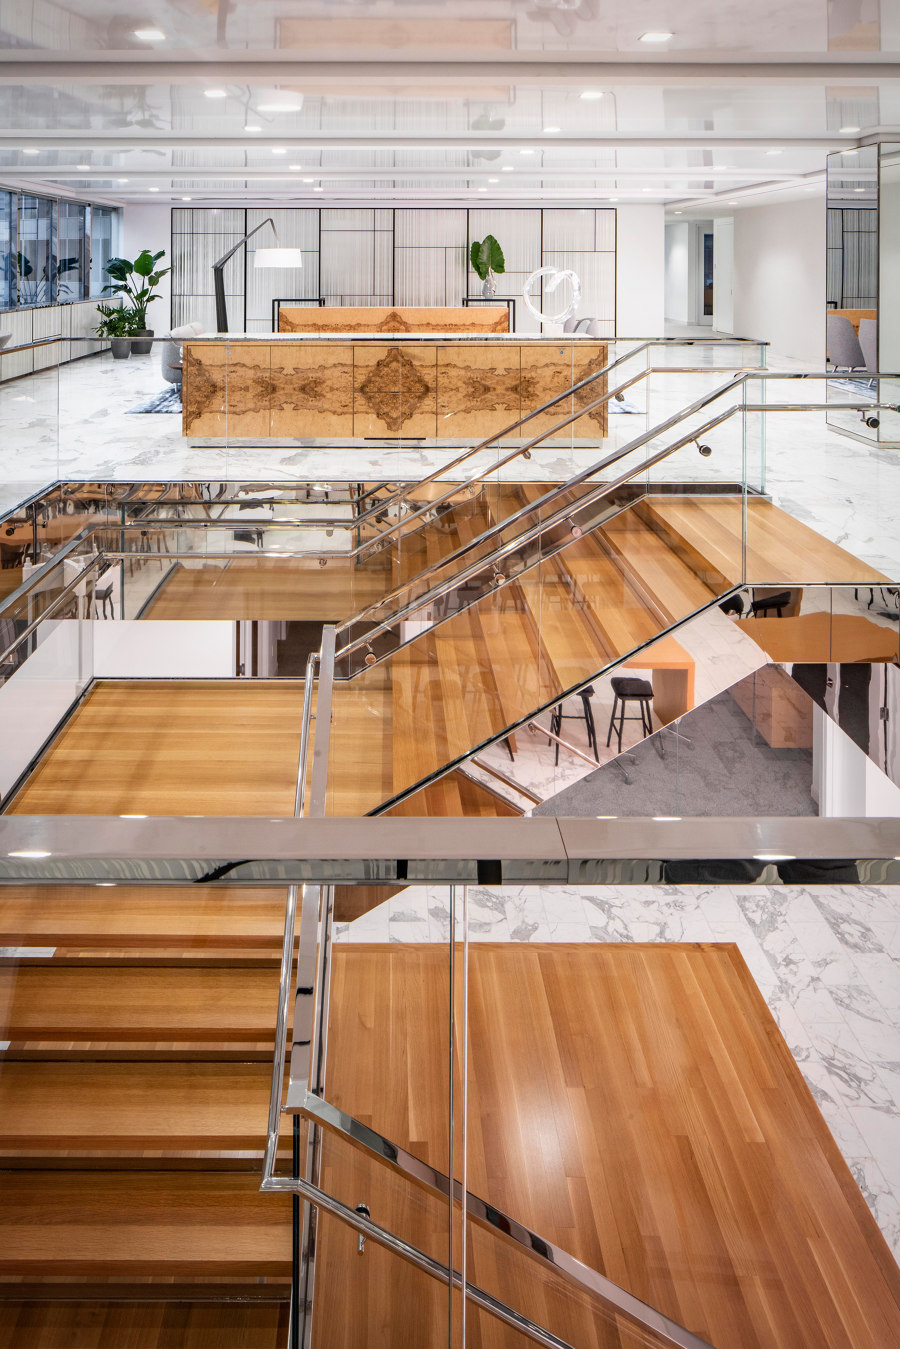 Charles River Associates Chicago by Elkus Manfredi Architects | Office facilities